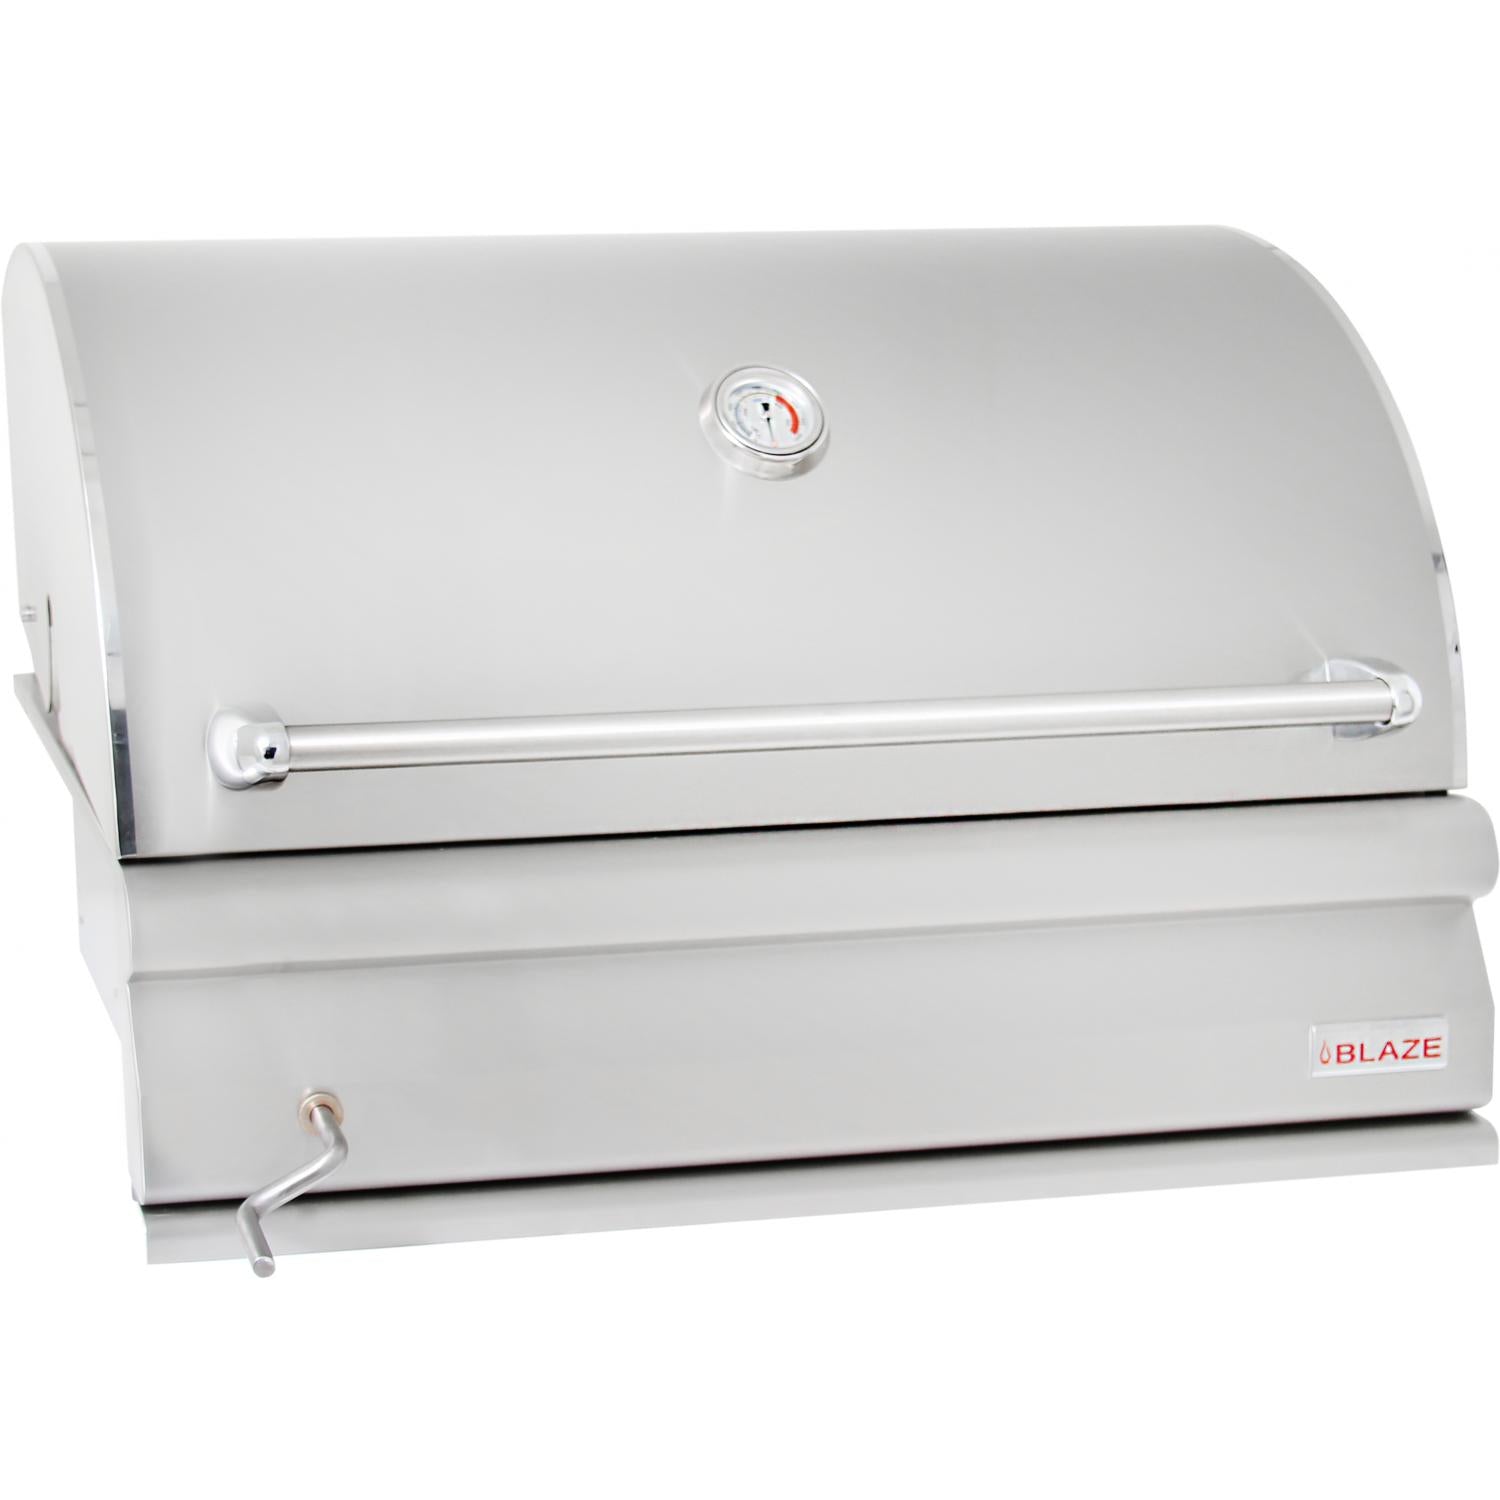 Blaze 32-Inch Built-In Stainless Steel Charcoal Grill With 